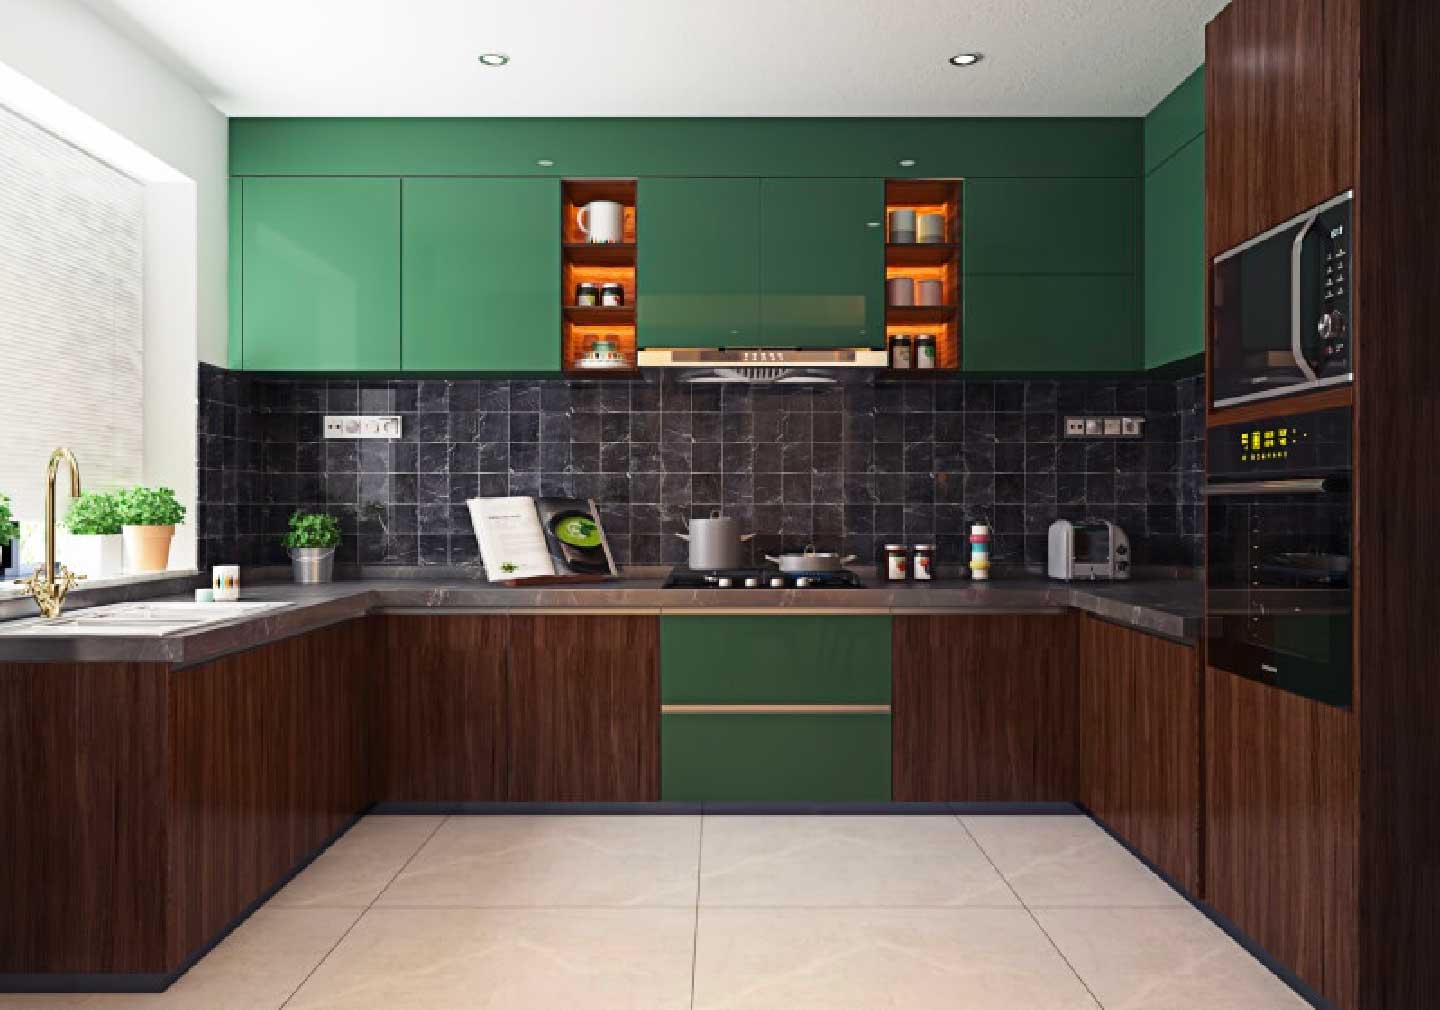 Factors to Focus in an Indian Kitchen
-Functionality